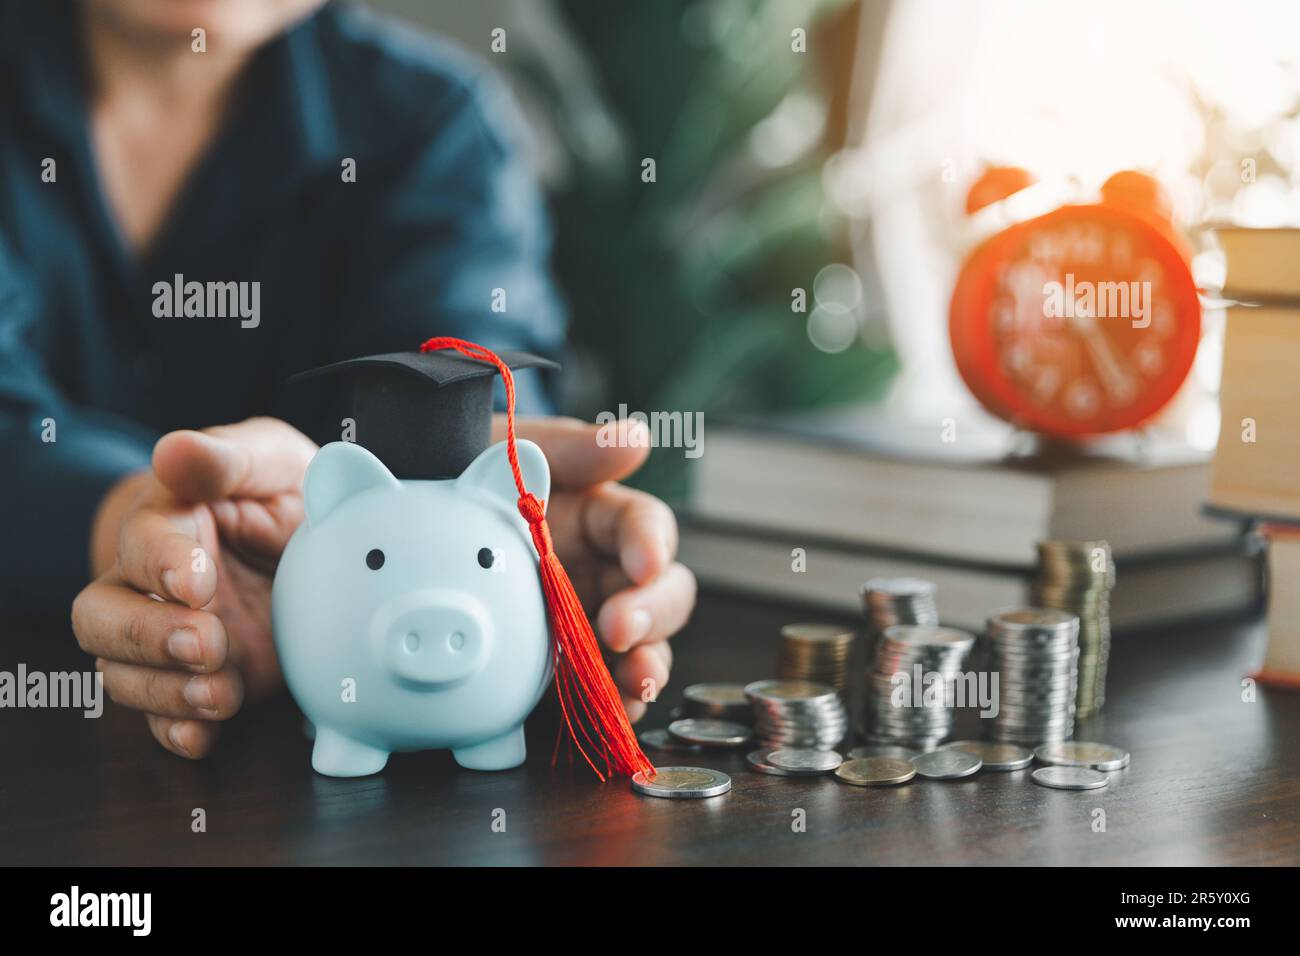 Hands protecting graduation cap on piggy bank with stack coins. Concept of saving money for scholarship to study abroad at university level. Financial Stock Photo